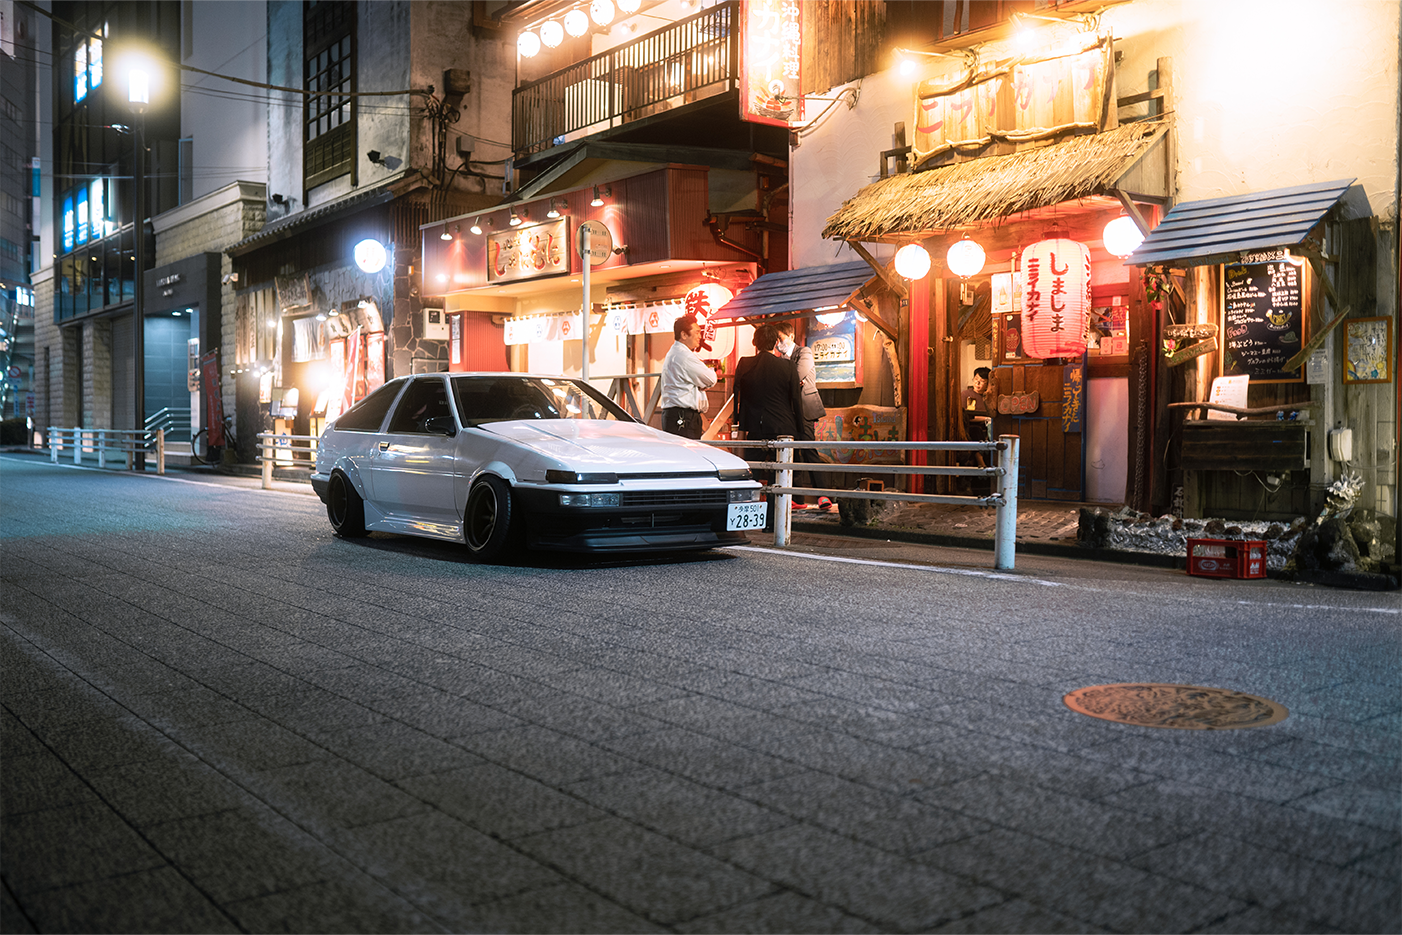 AE86 in front of a Izakaya, Tokyo